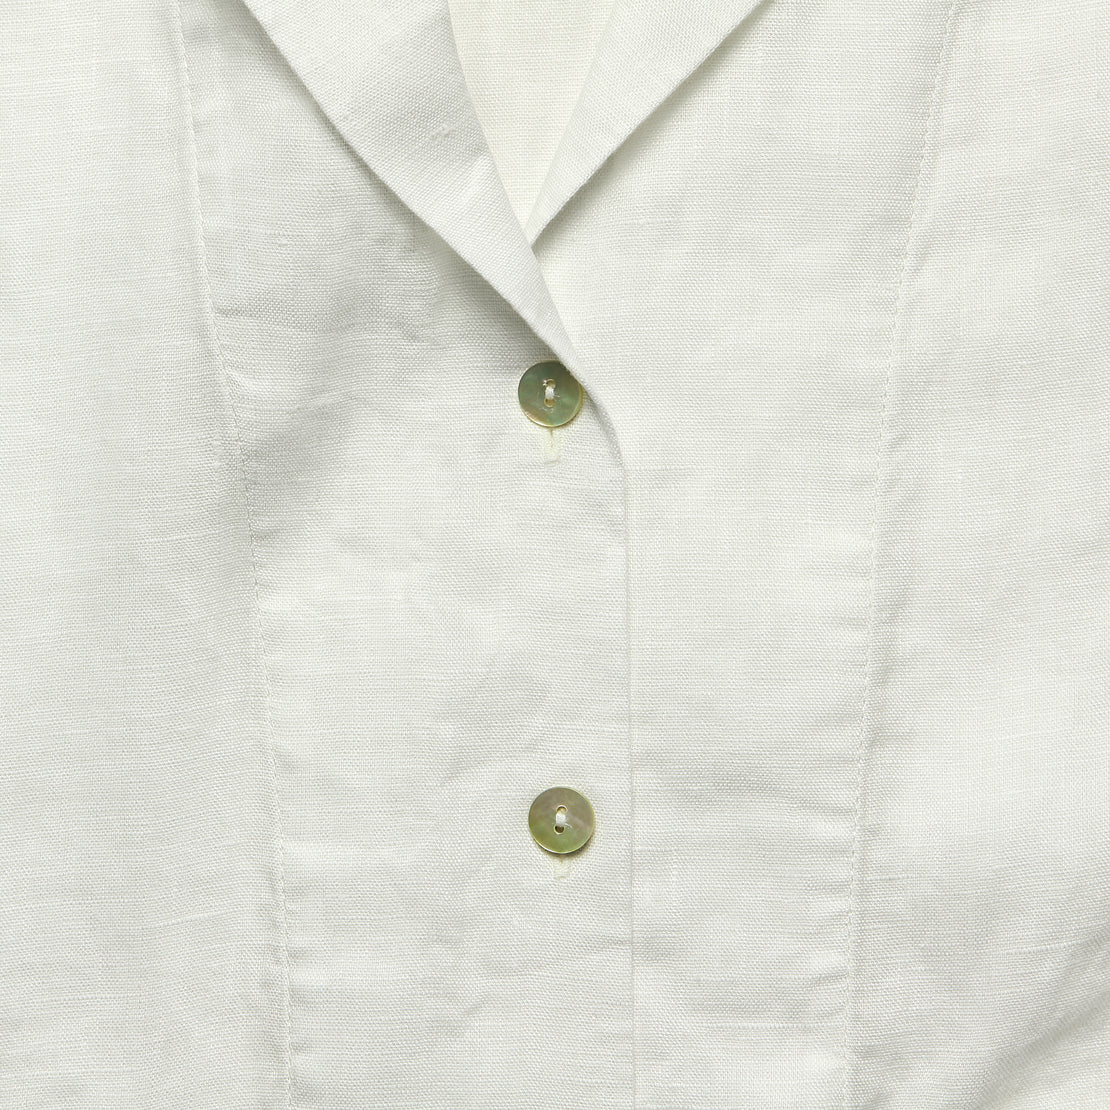 Front Pocket Shirt - White - Fog Linen - STAG Provisions - W - Tops - S/S Woven